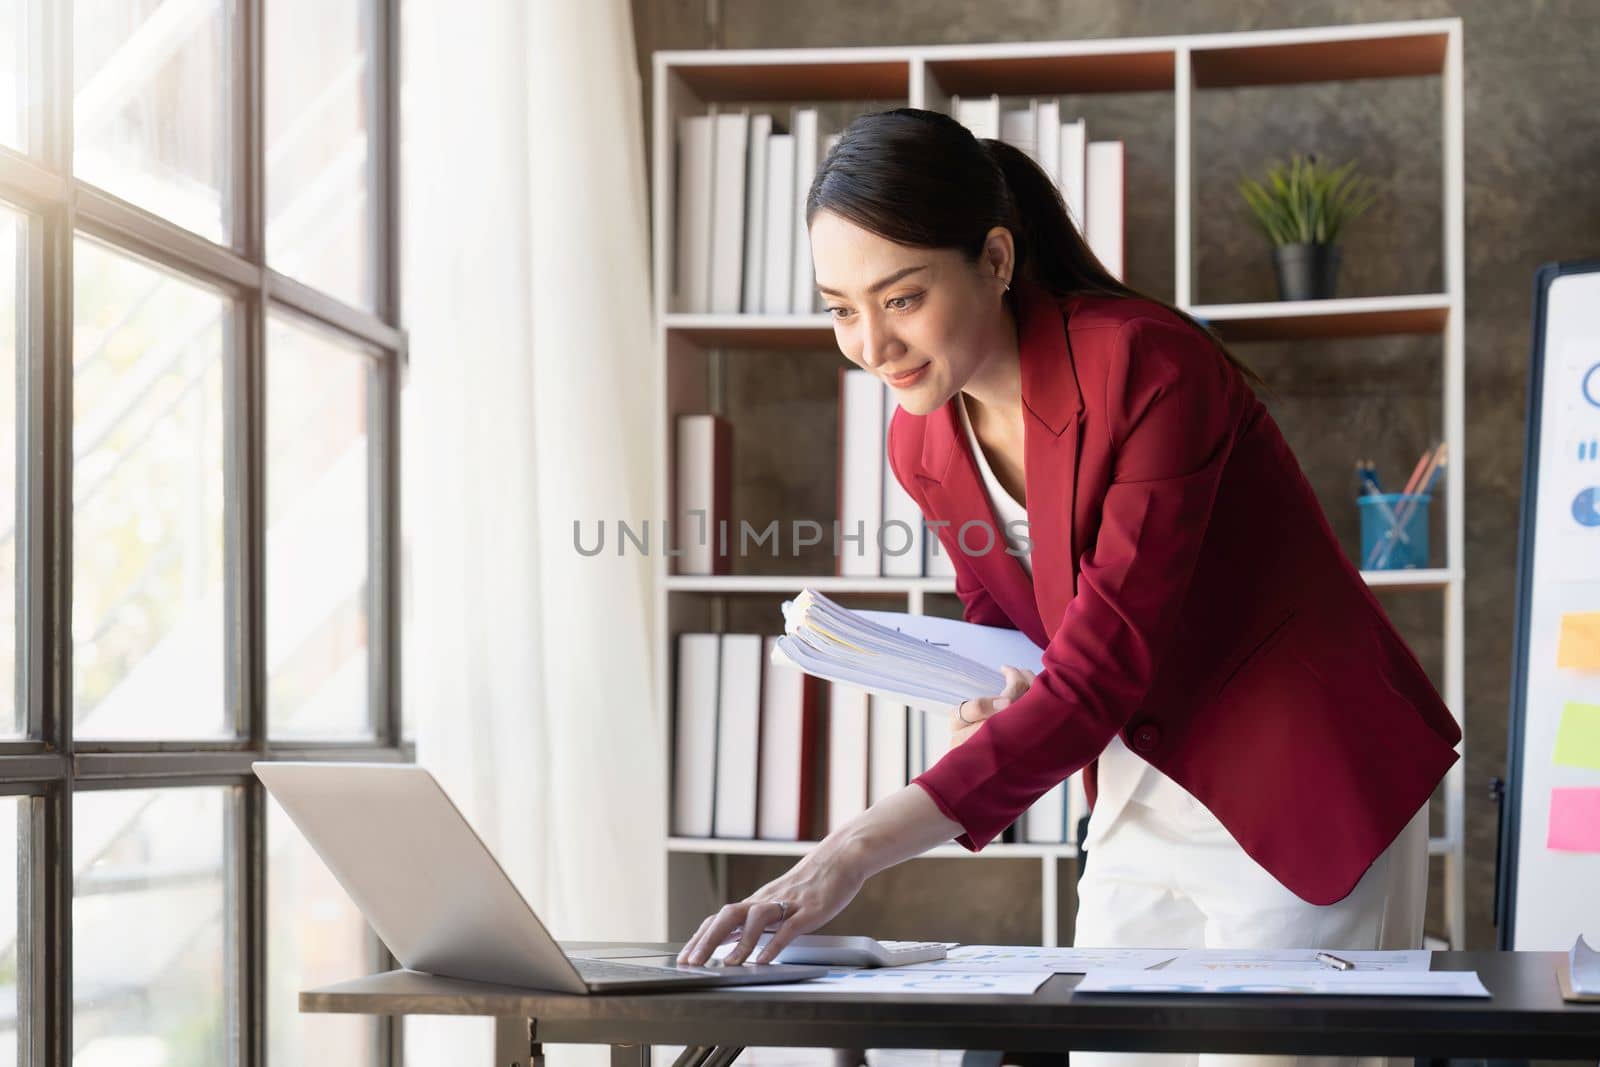 Smiling young woman looking at tablet working in office and .in hand holding business documents.